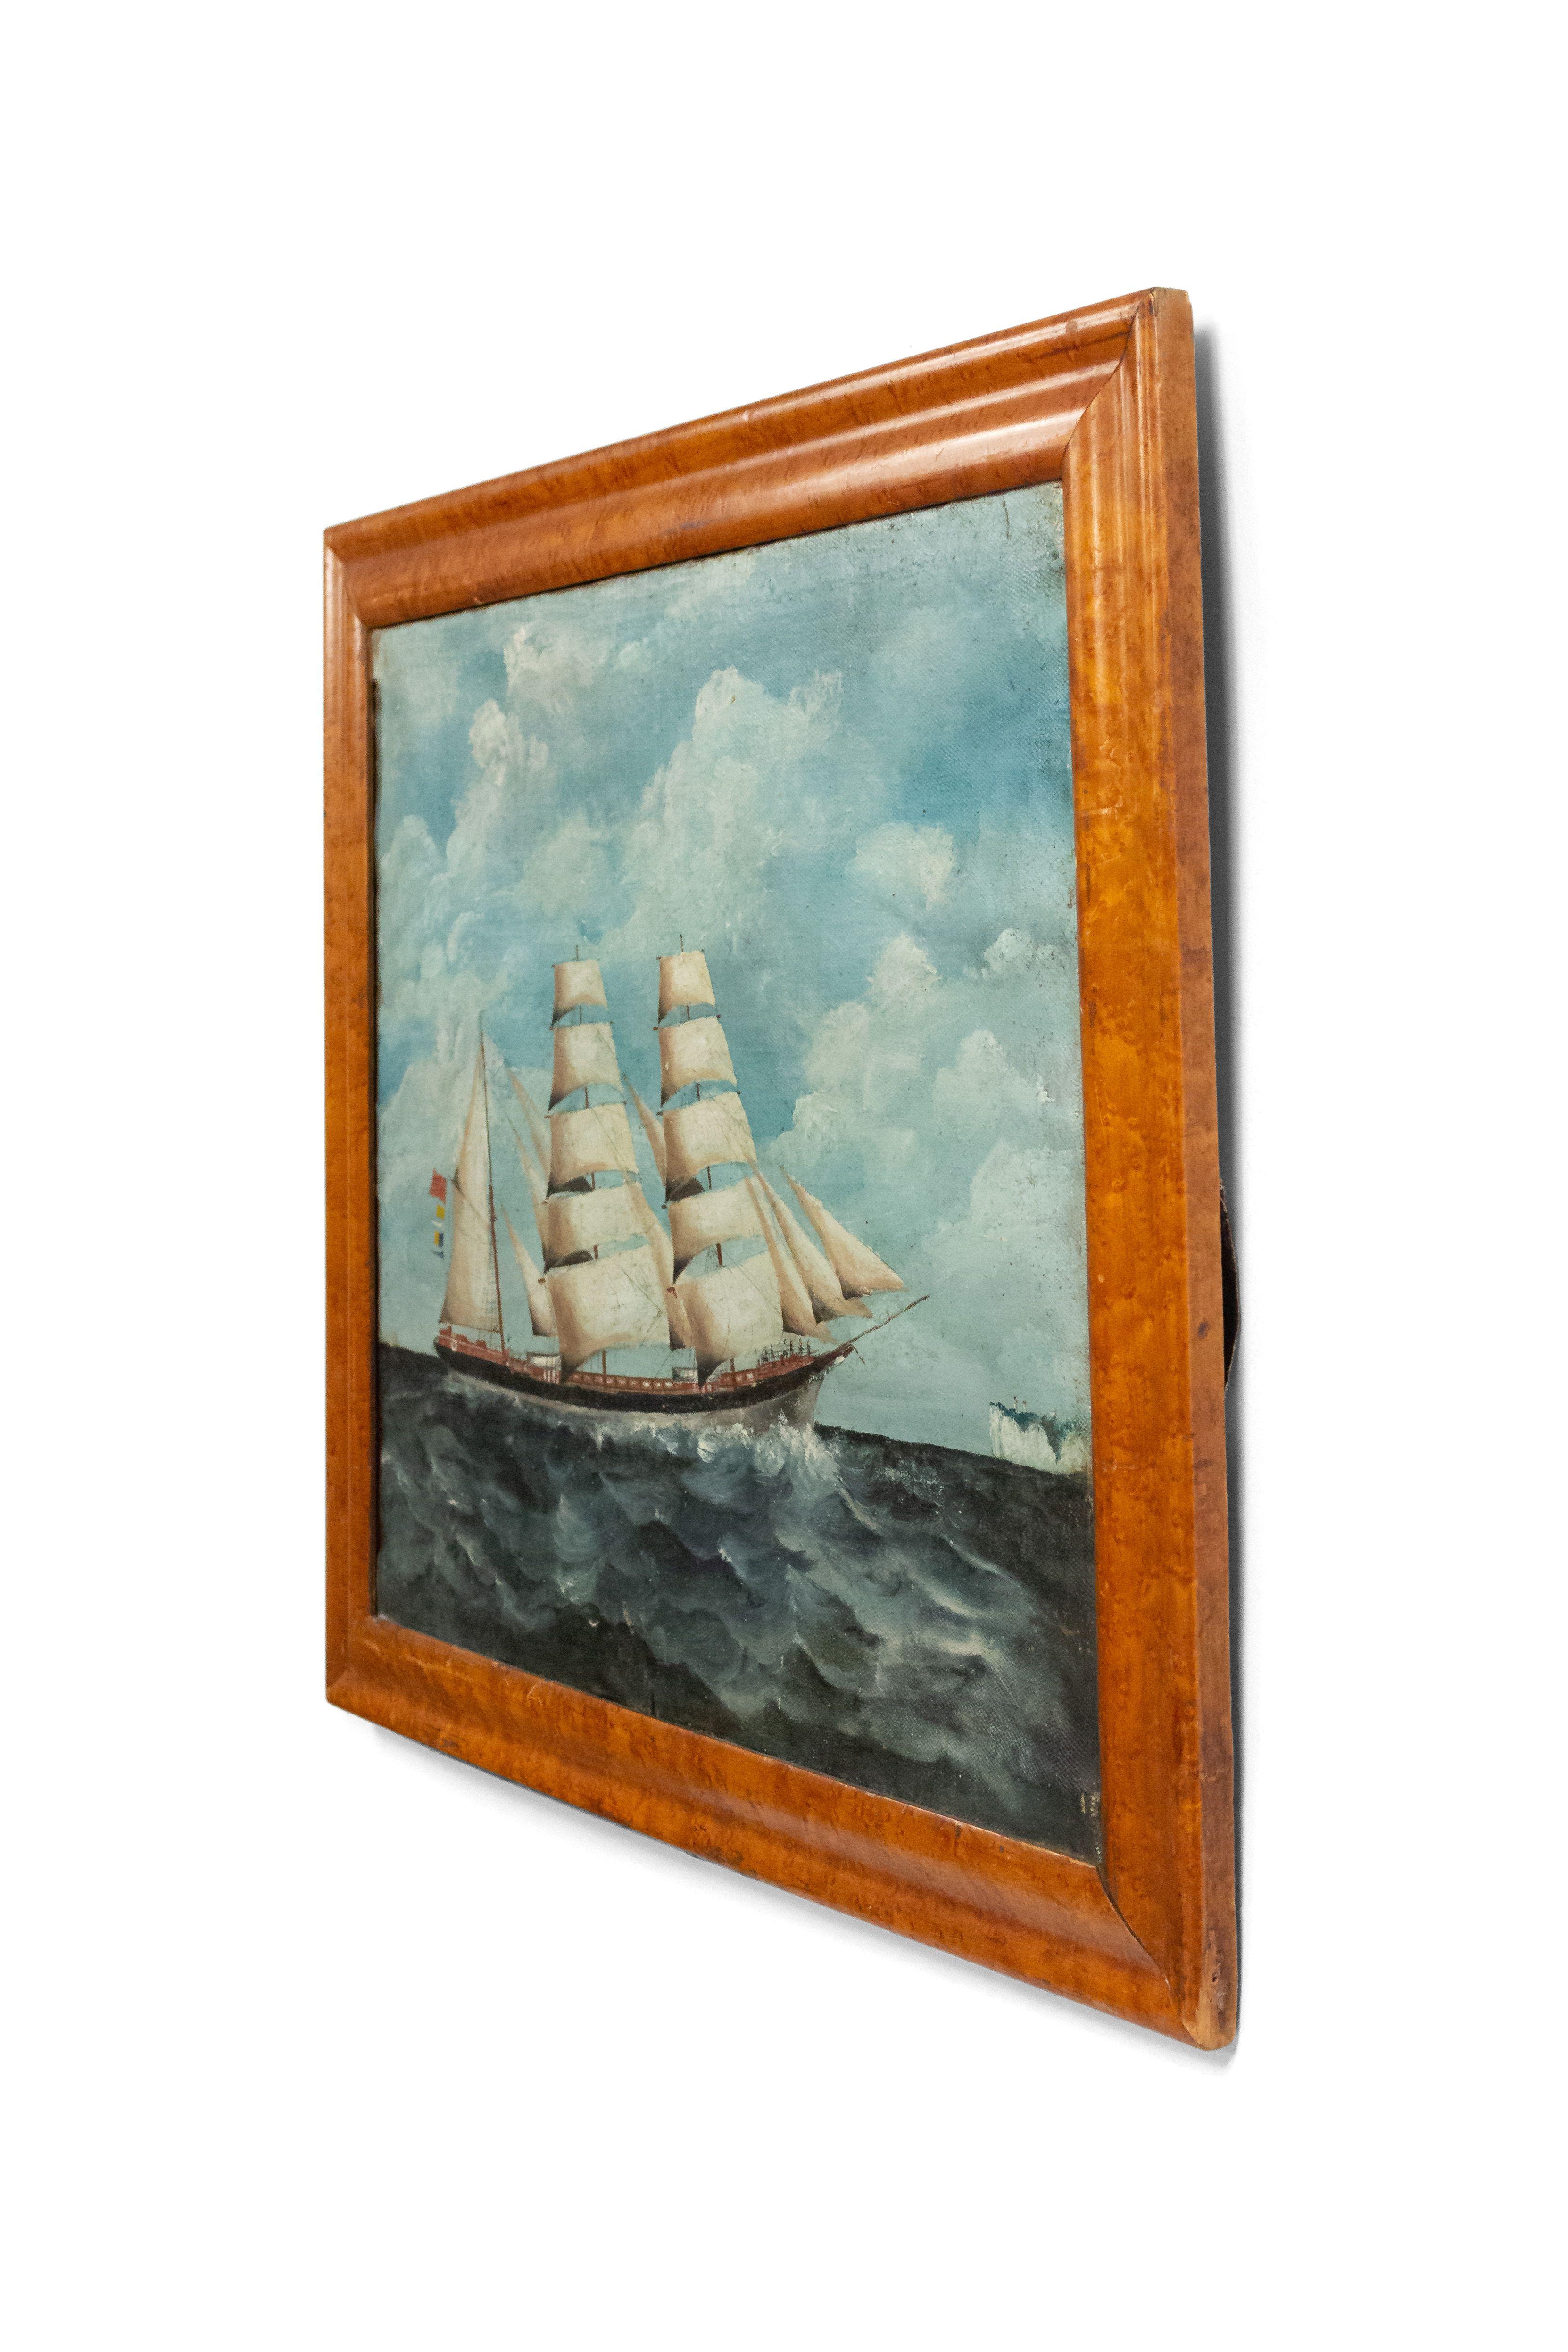 20th Century English Victorian Seascape Painting in a Wooden Frame In Good Condition For Sale In New York, NY